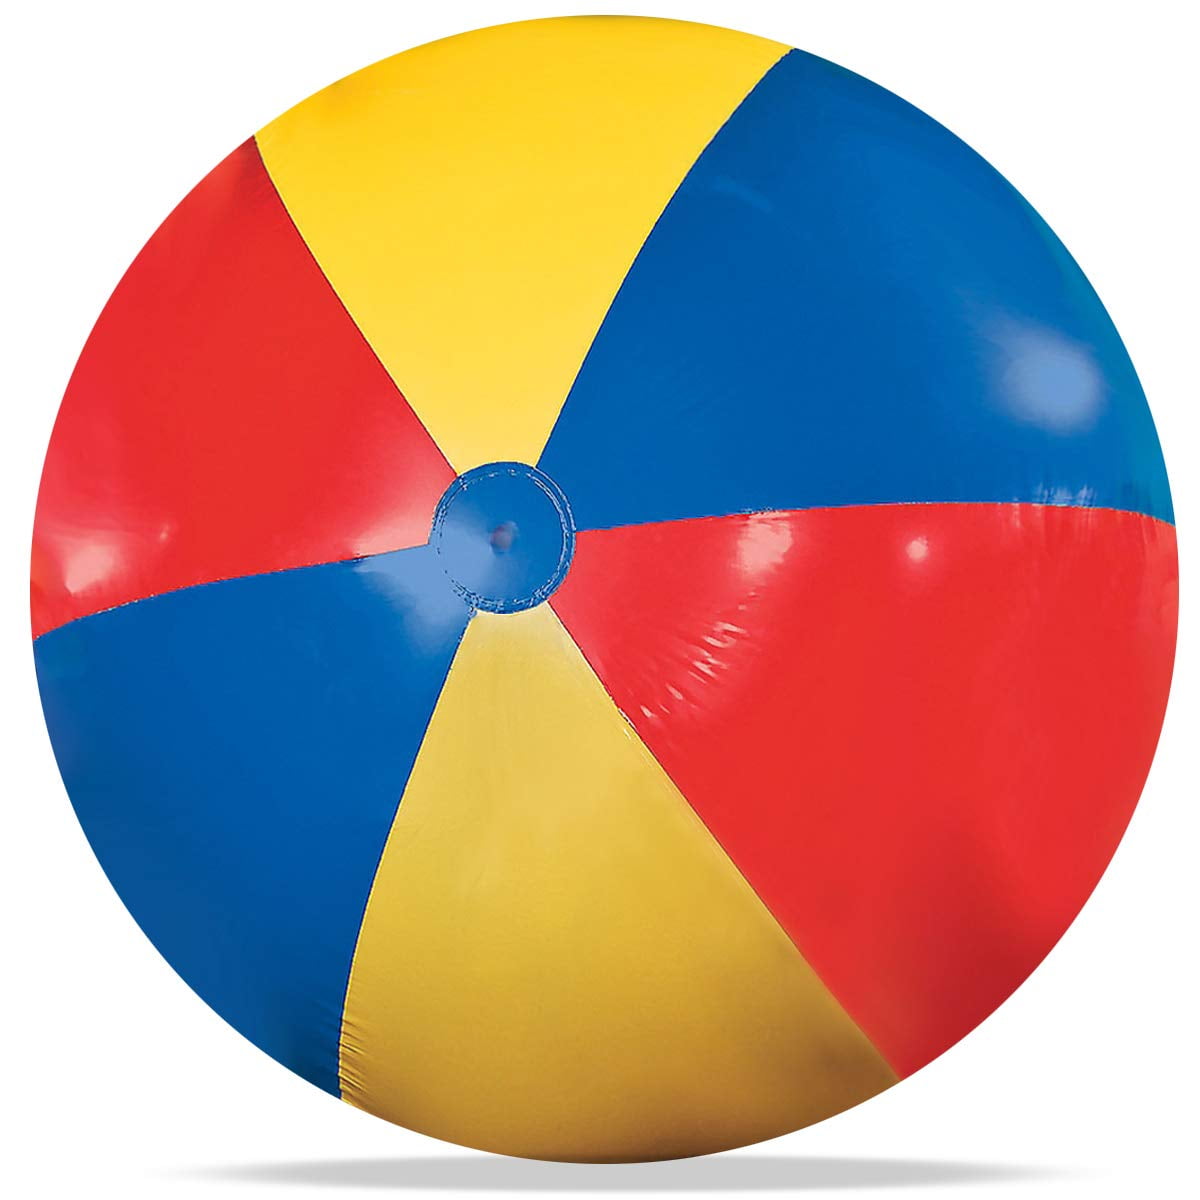 New Giant Beach Ball Jumbo Inflatable Thick Wall Multi-Color 4' & 6' Inflated 